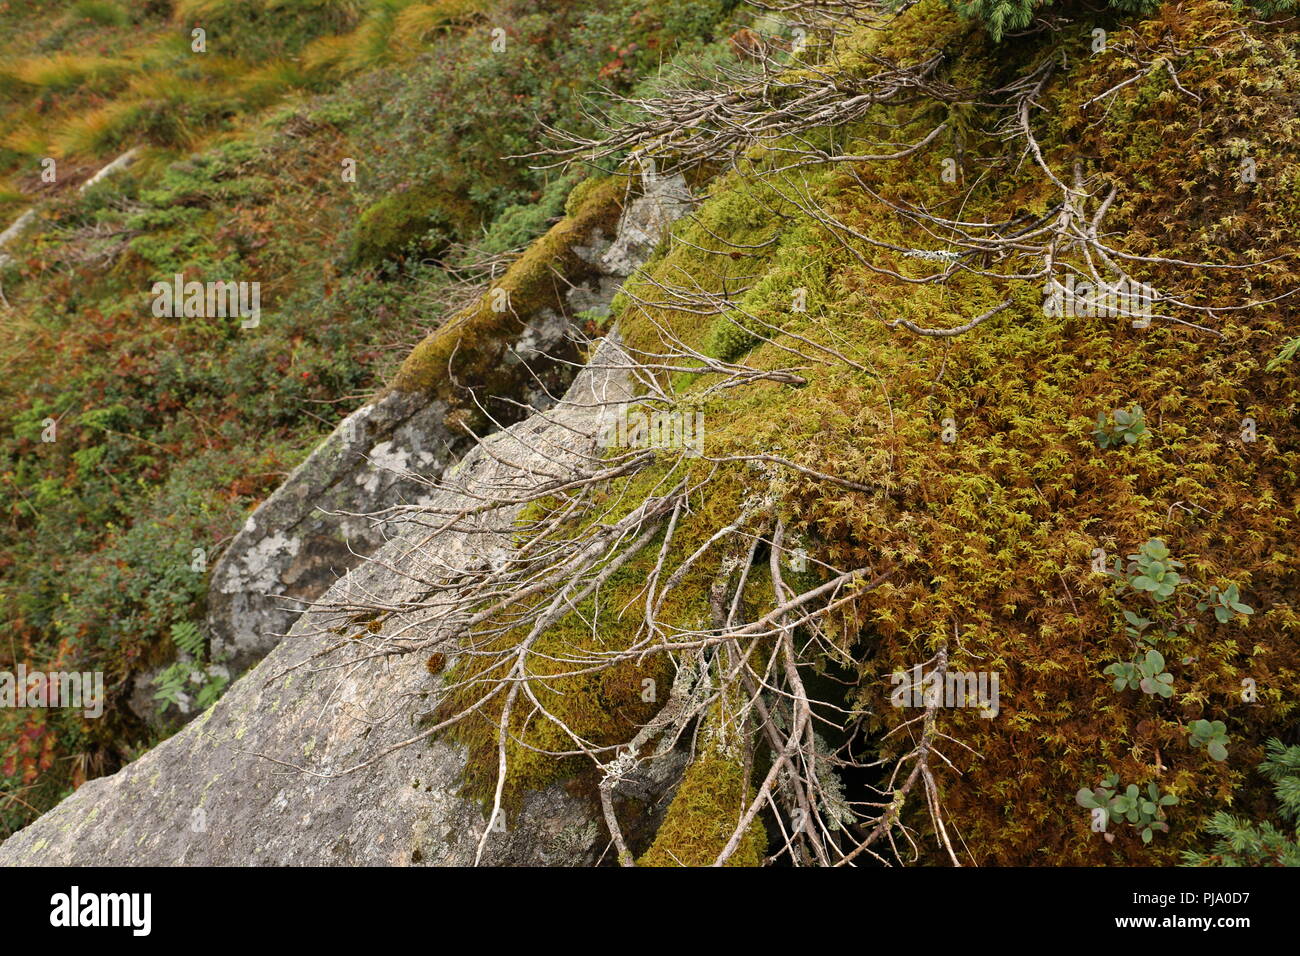 Closeup of rock stone with moss and plants on Mount Ulriken, Bergen.  Northern nature, mountains, fjords, forest, hiking. Norway, Scandinavia,  tourism Stock Photo - Alamy